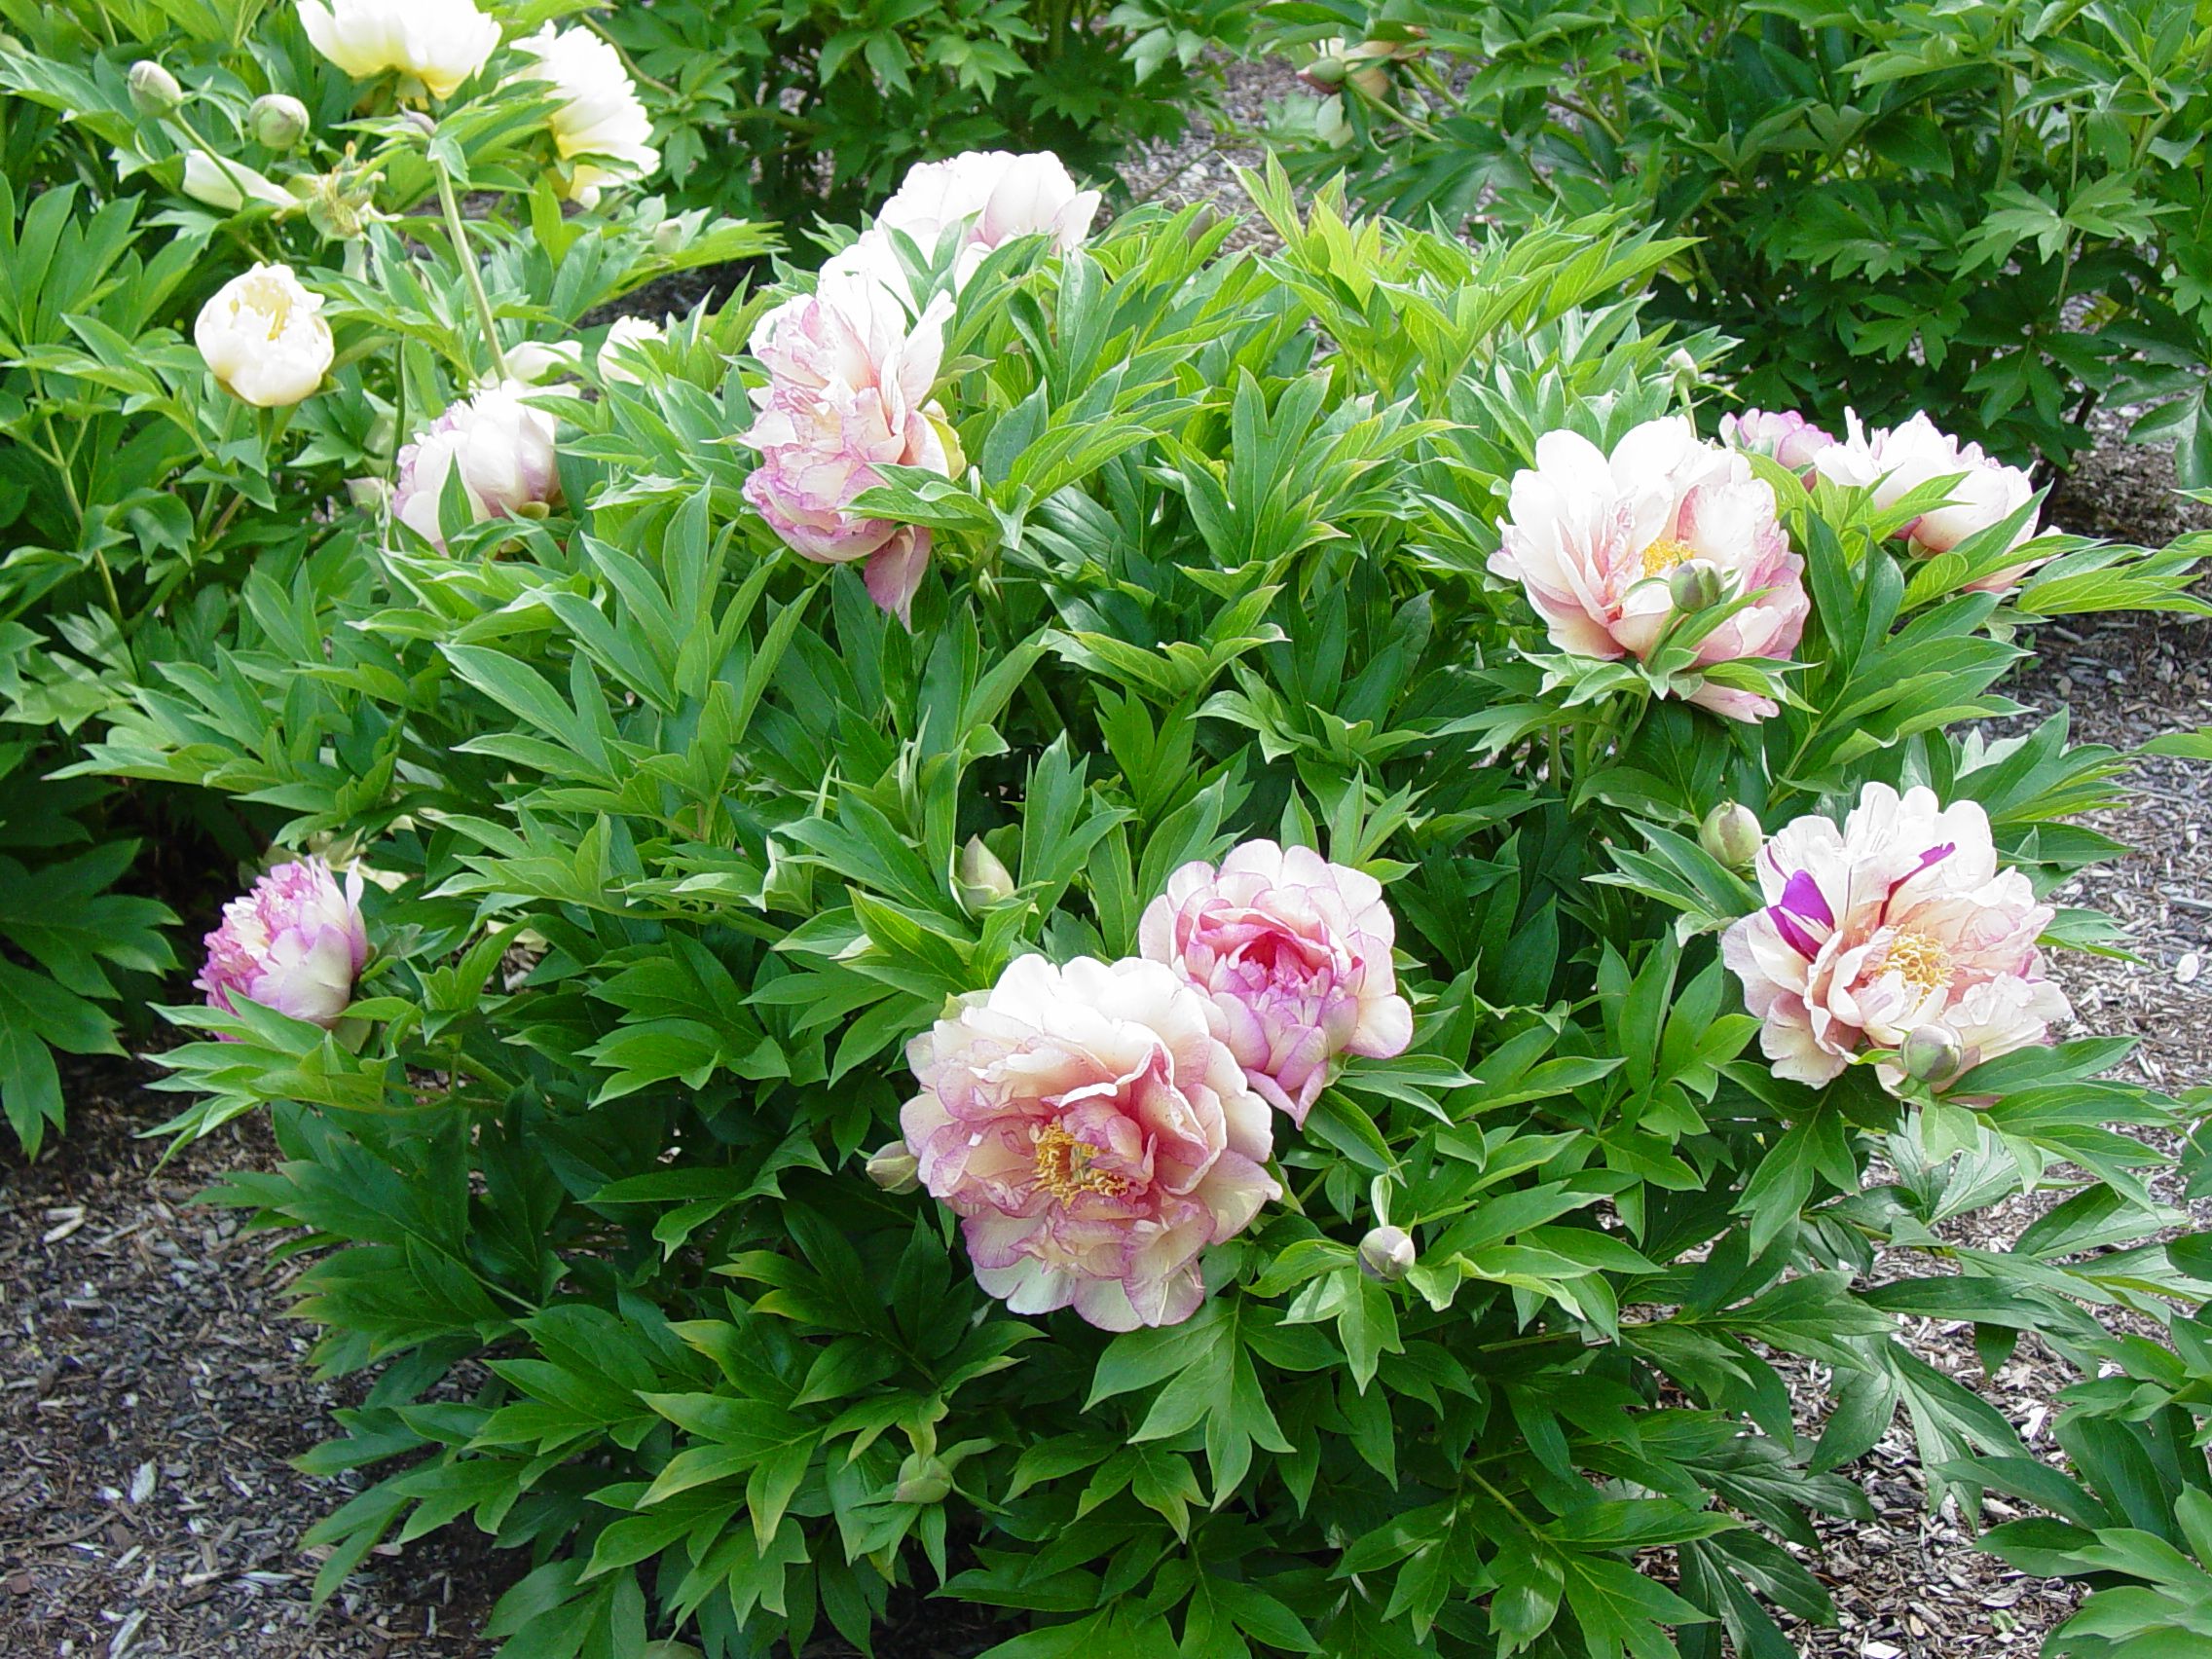 images/plants/paeonia/pae-truly-scrumptious/pae-truly-scrumptious-0011.JPG